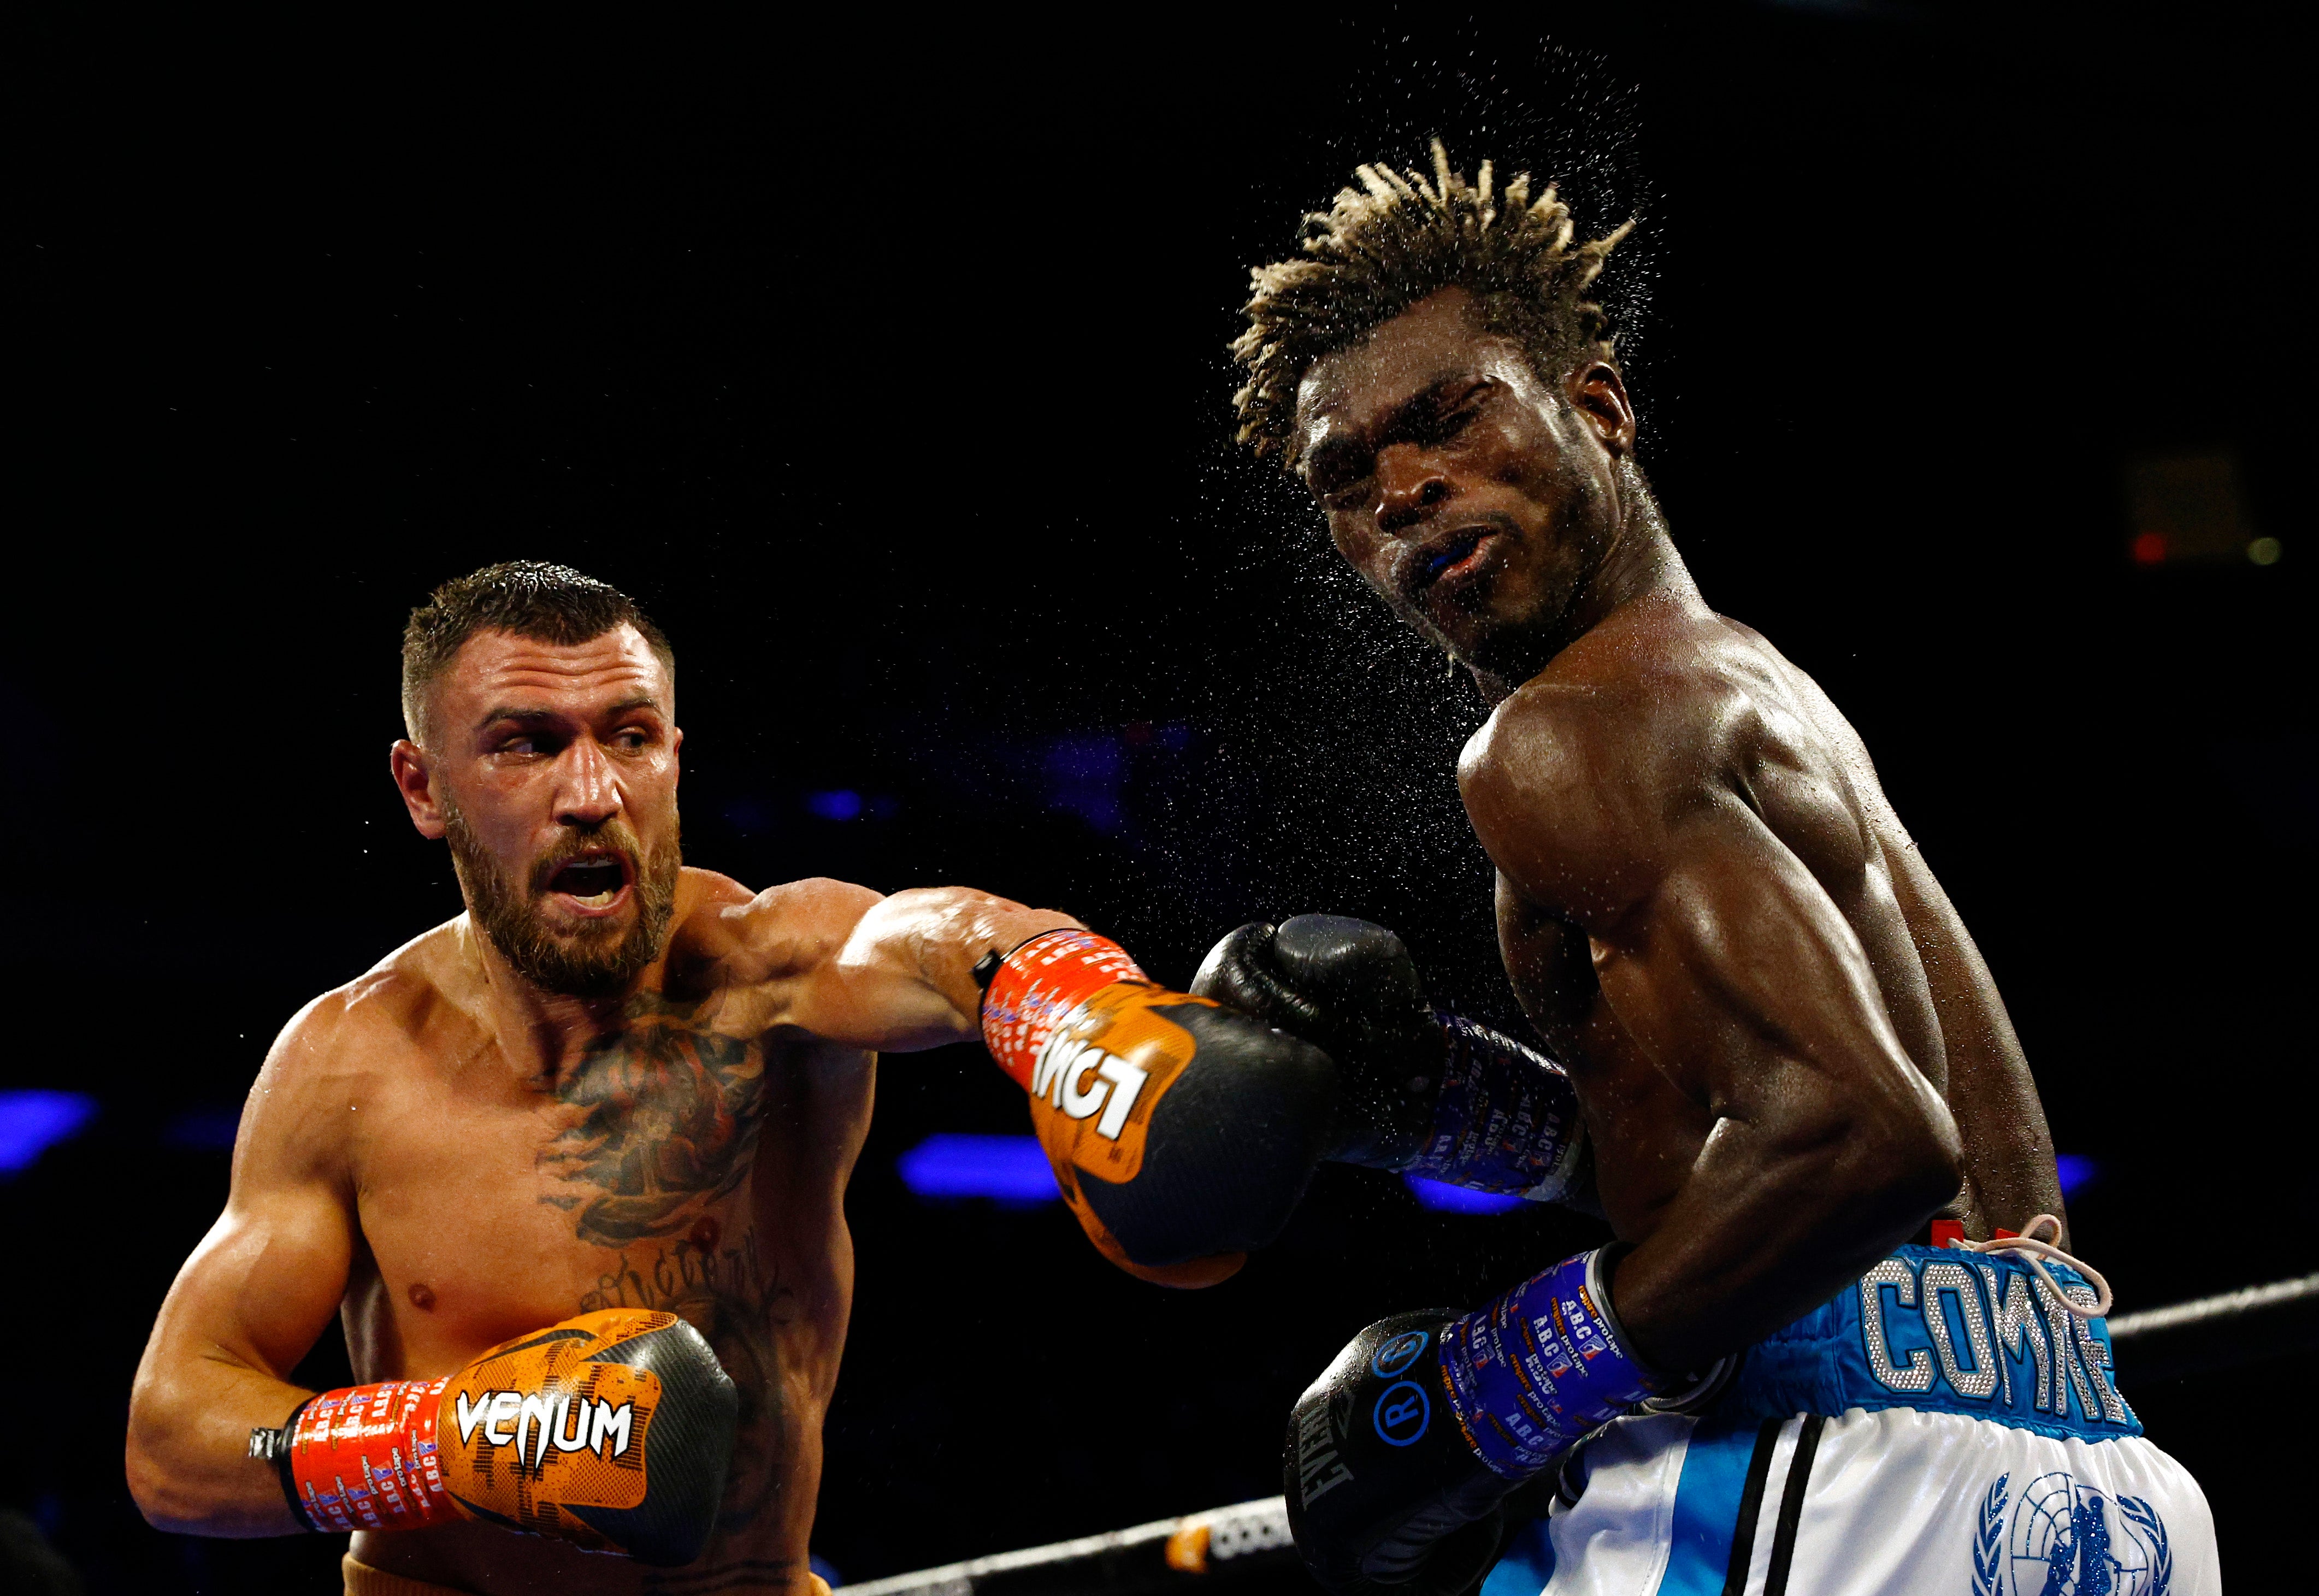 Vasiliy Lomachenko outpointed Richard Commey in his last fight